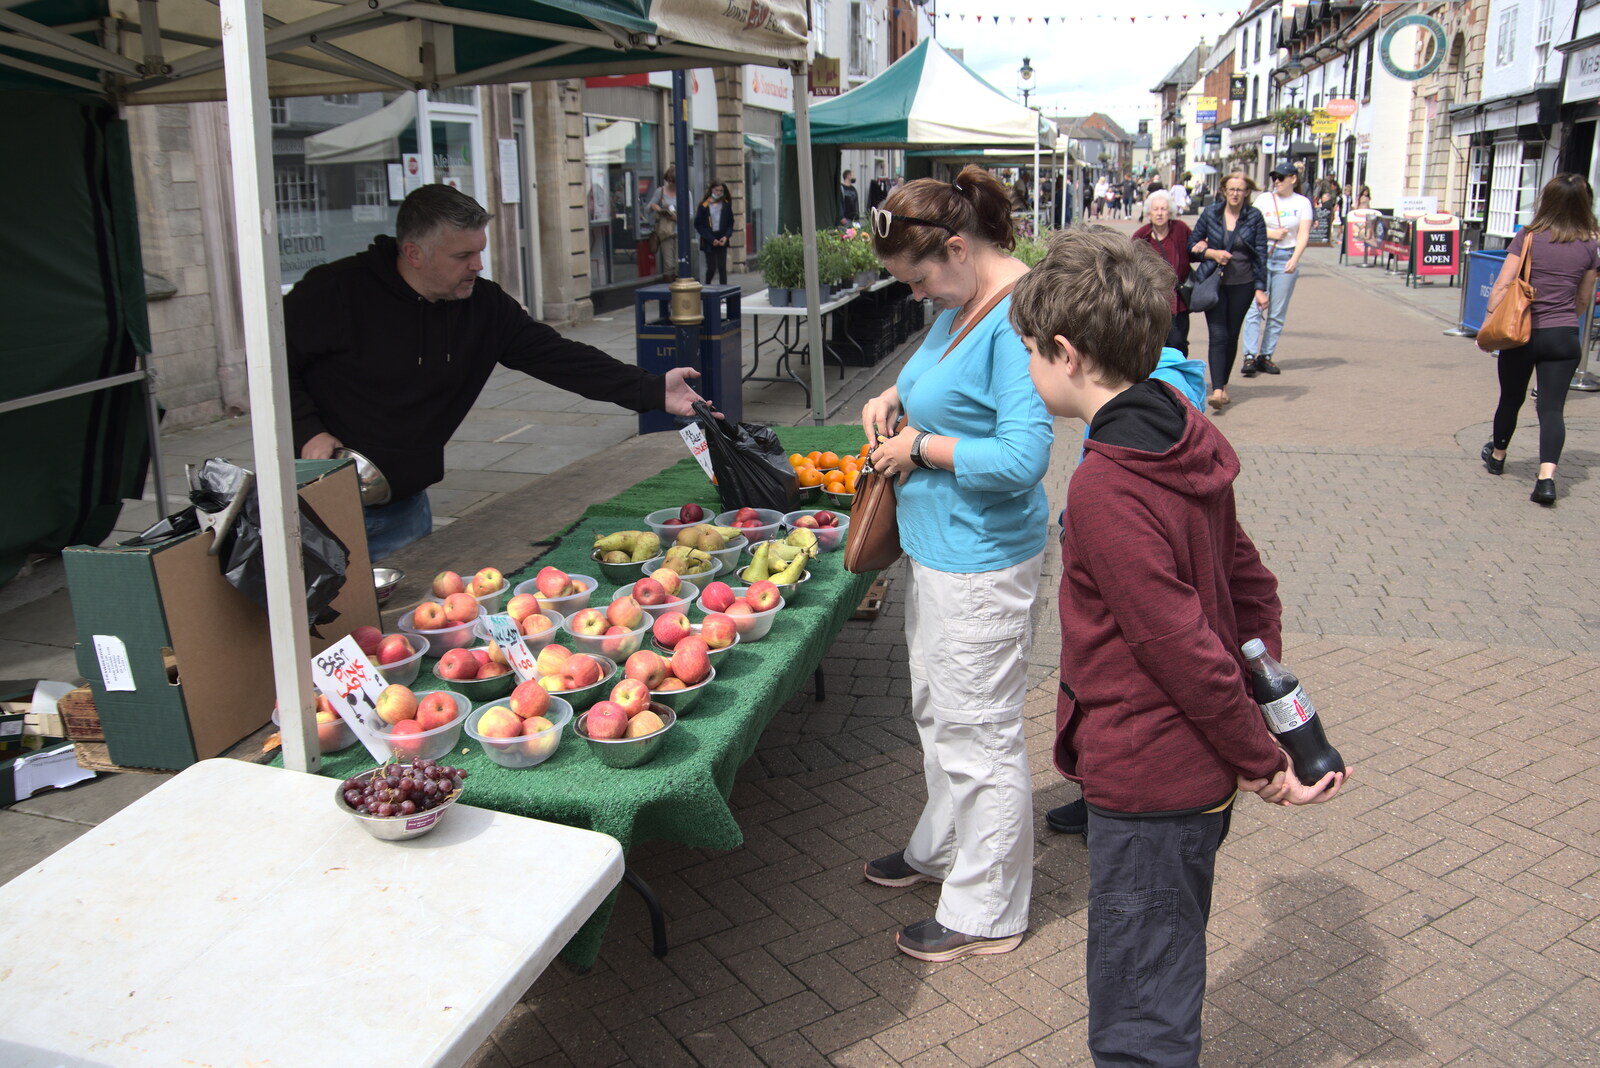 Isobel gets some fruit on the market from Pork Pies and Dockside Dereliction, Melton Mowbray and Liverpool - 7th August 2021